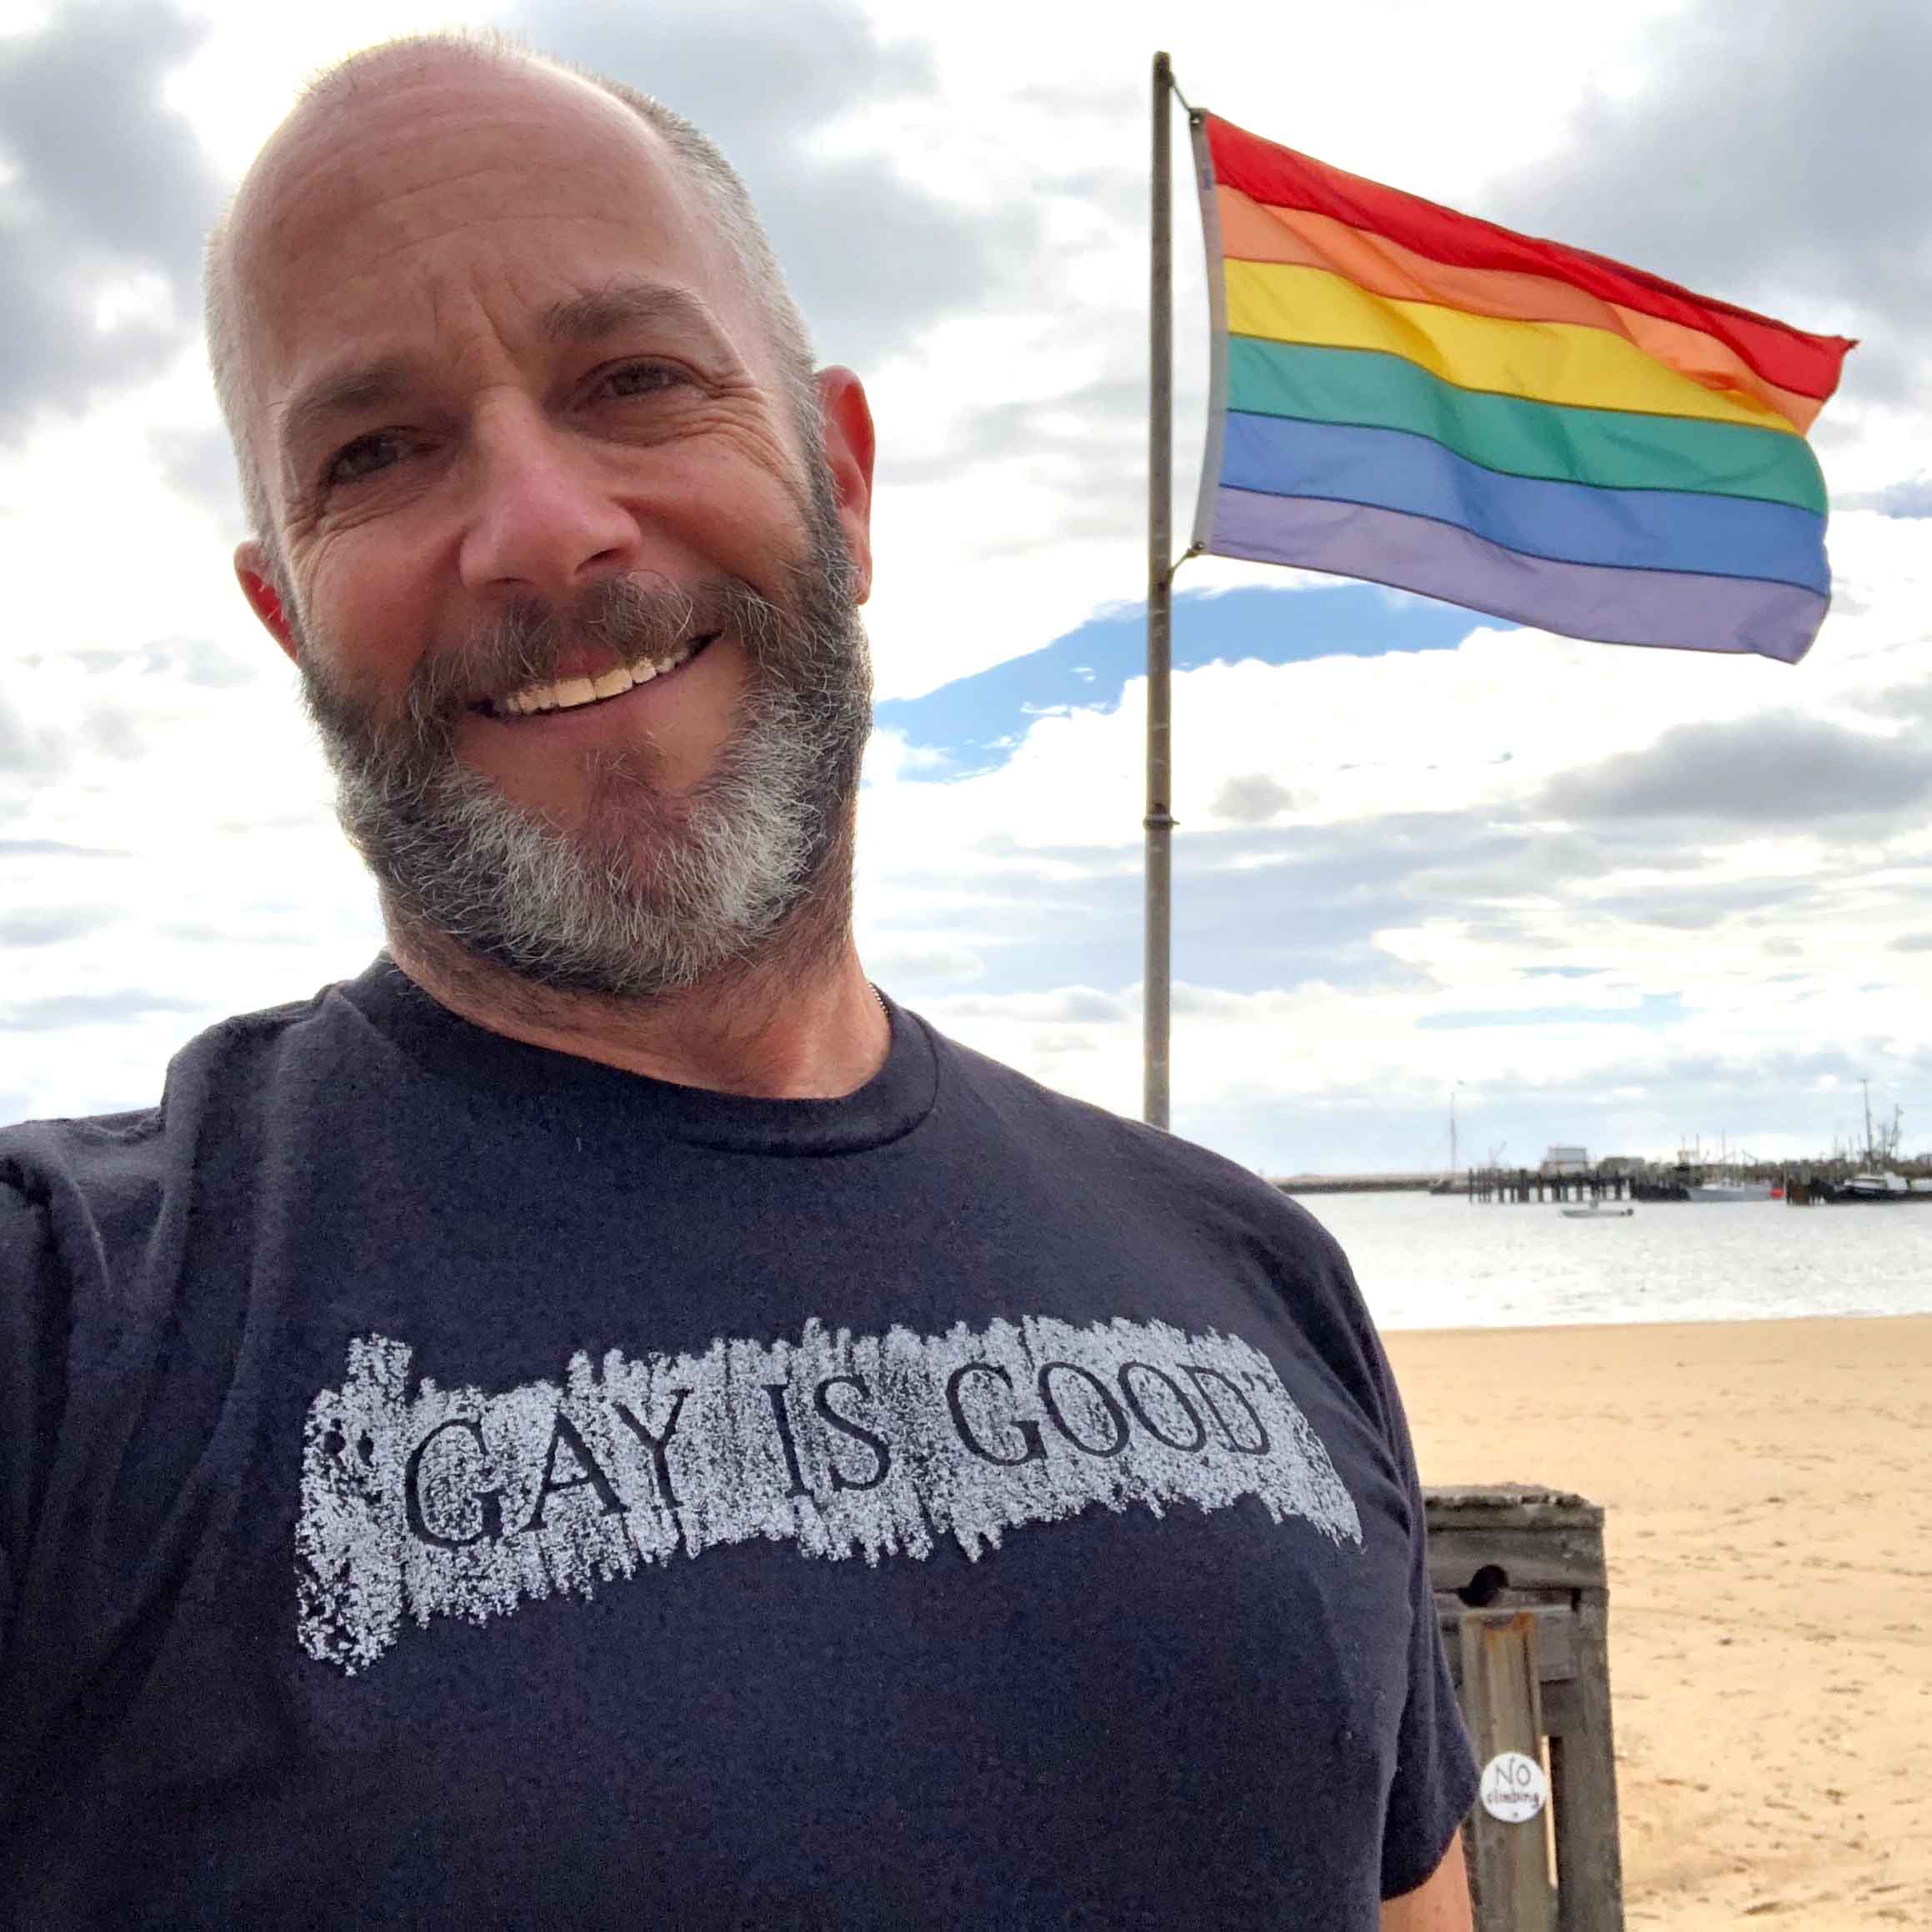 GAY IS GOOD T-shirt supporting ONE Archives Foundation black adam singer